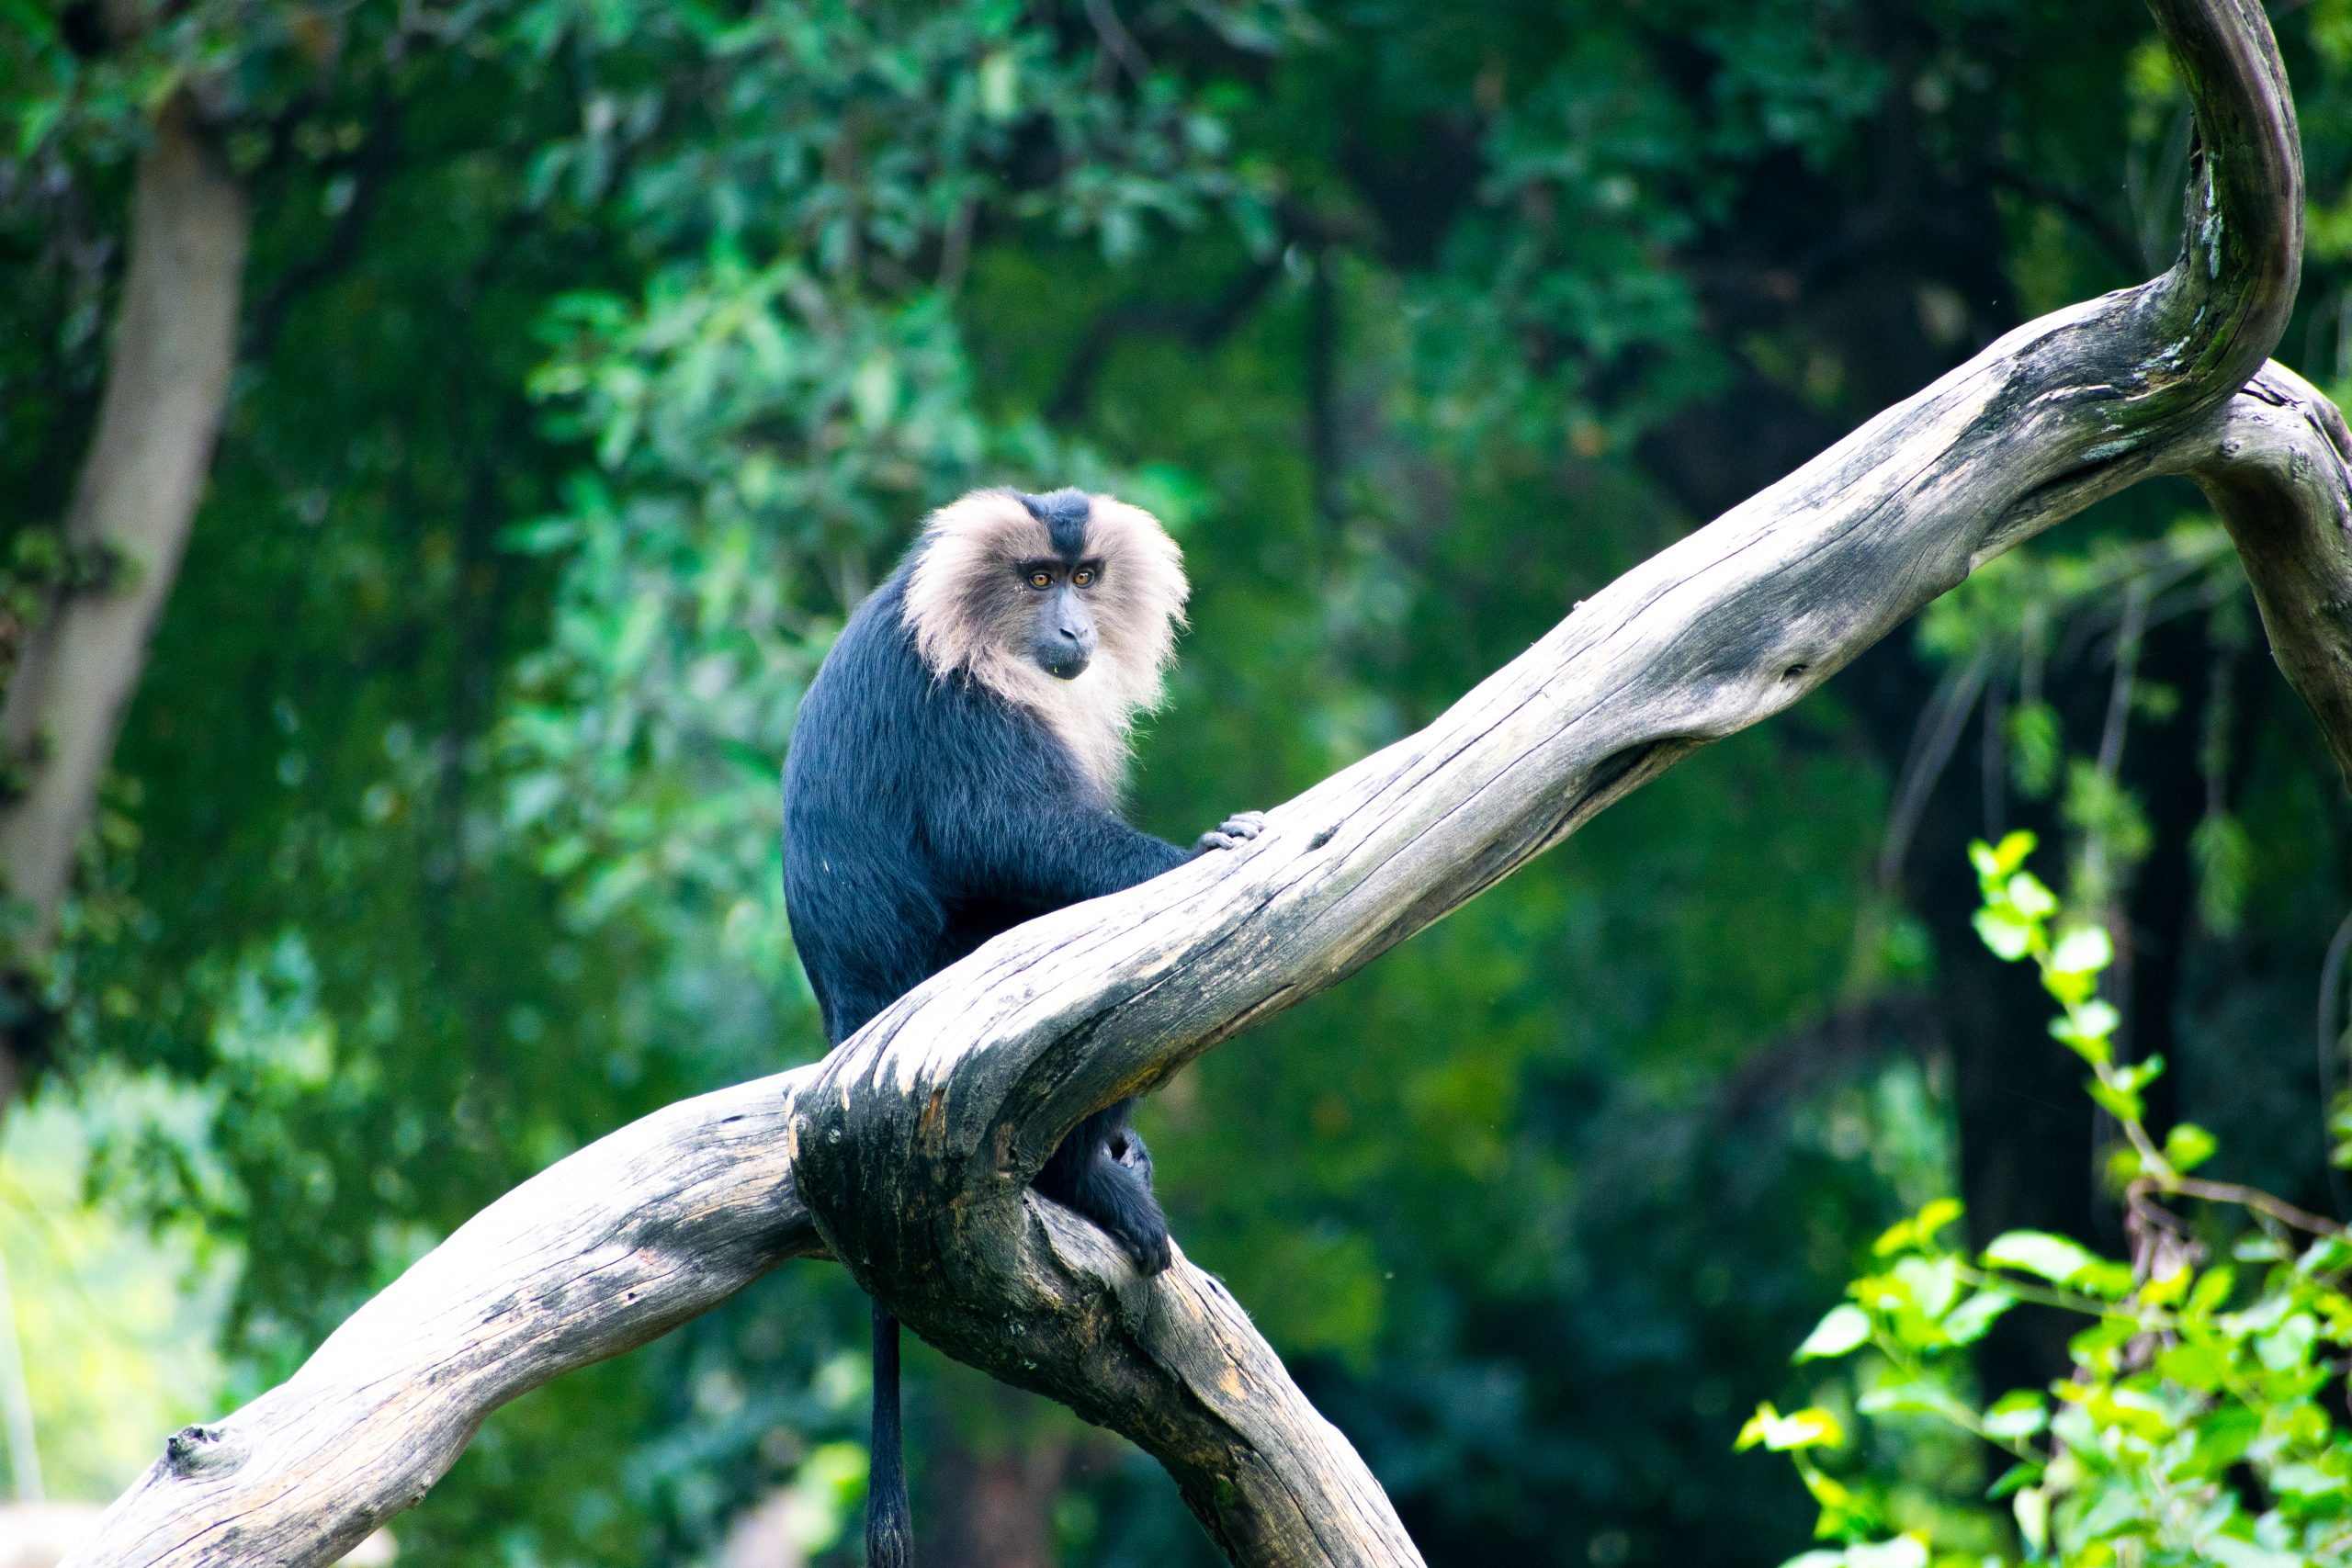 Lion-tailed macaque on Tree